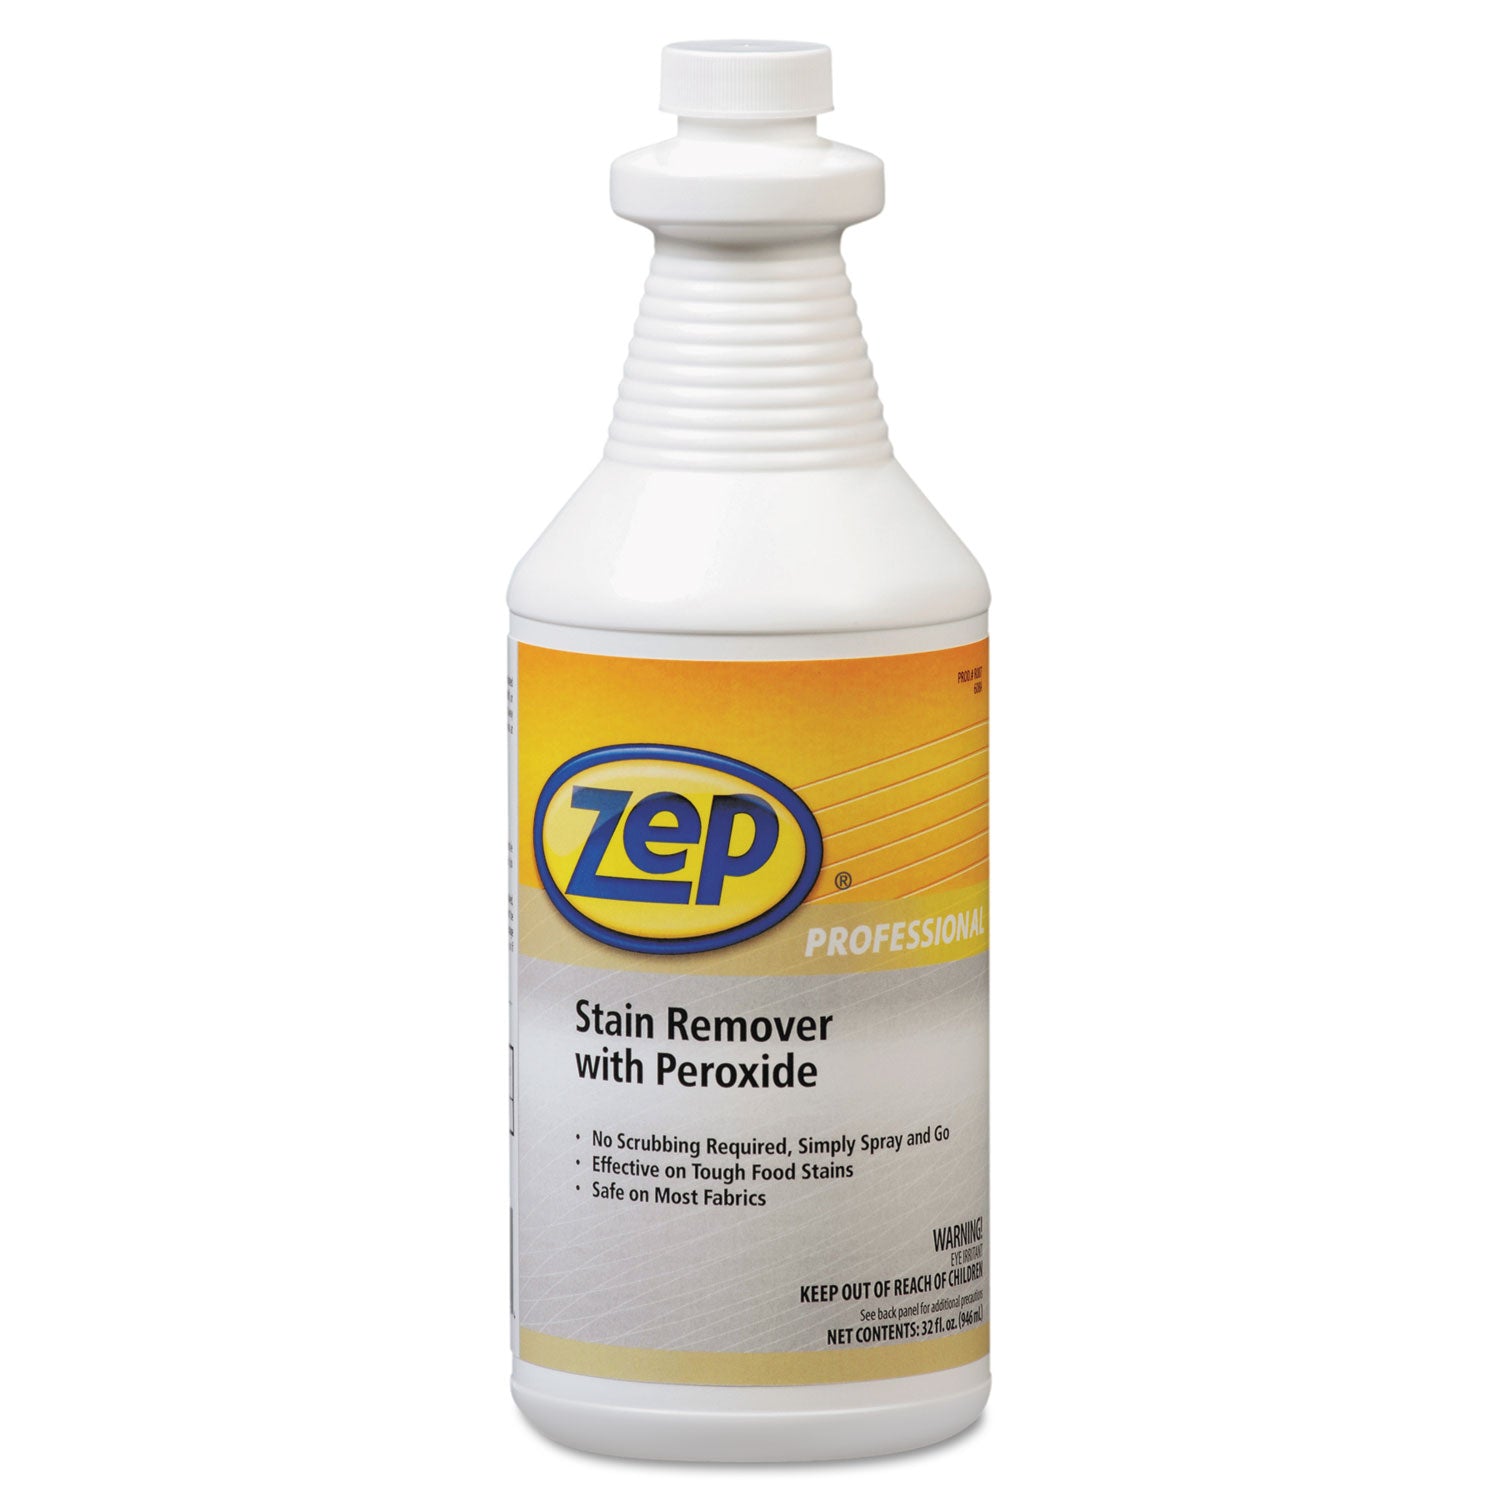 stain-remover-with-peroxide-quart-bottle-6-carton_zpp1041705 - 1